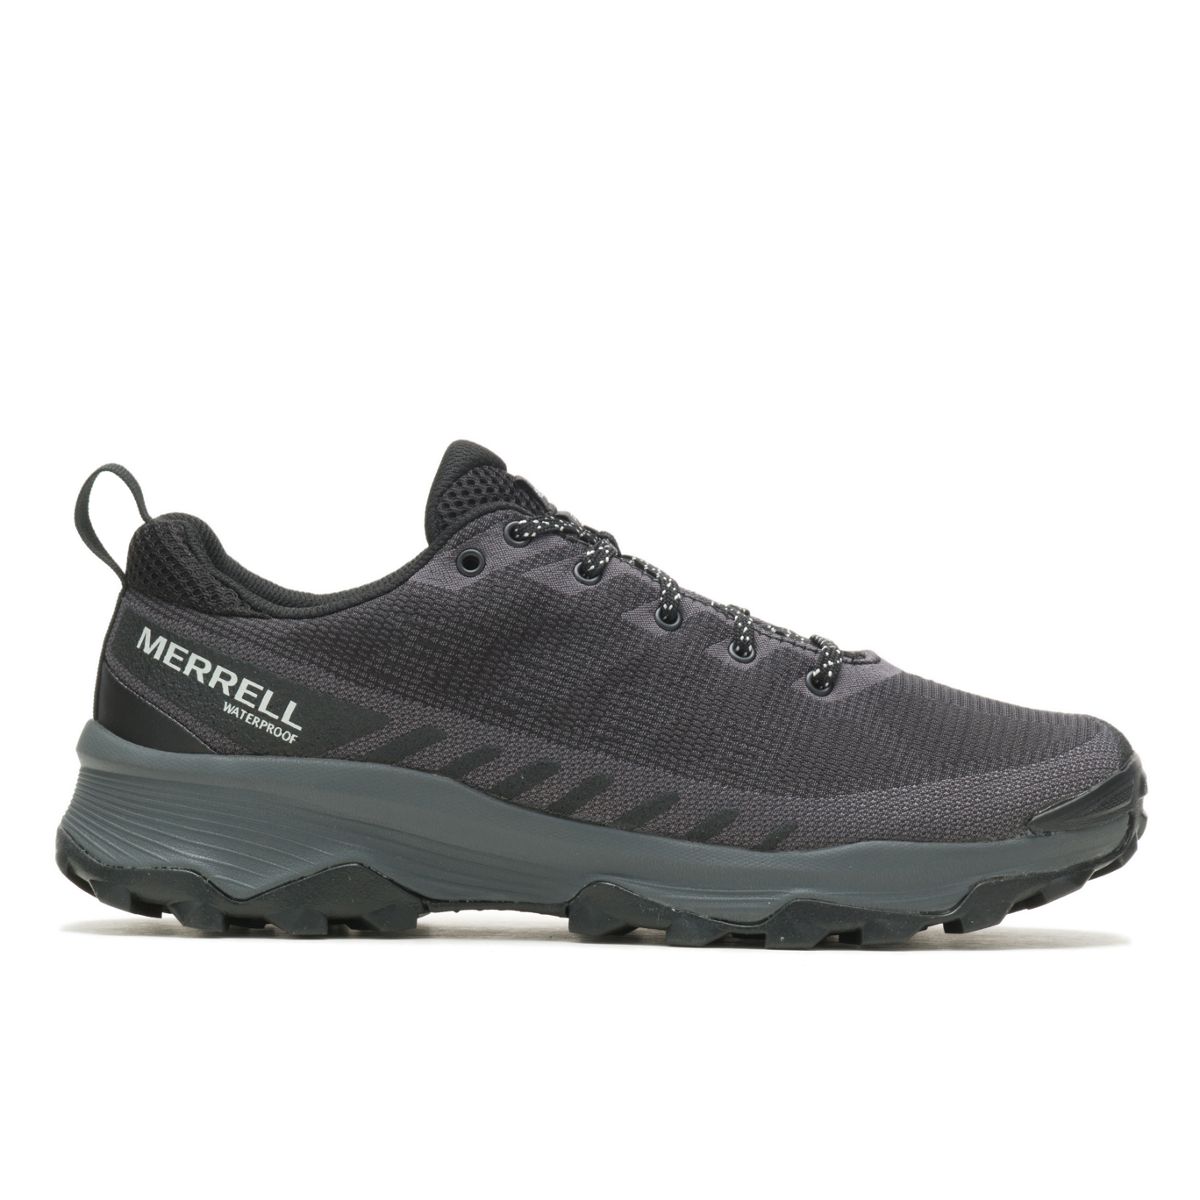 Men's Moab Collection - Merrell